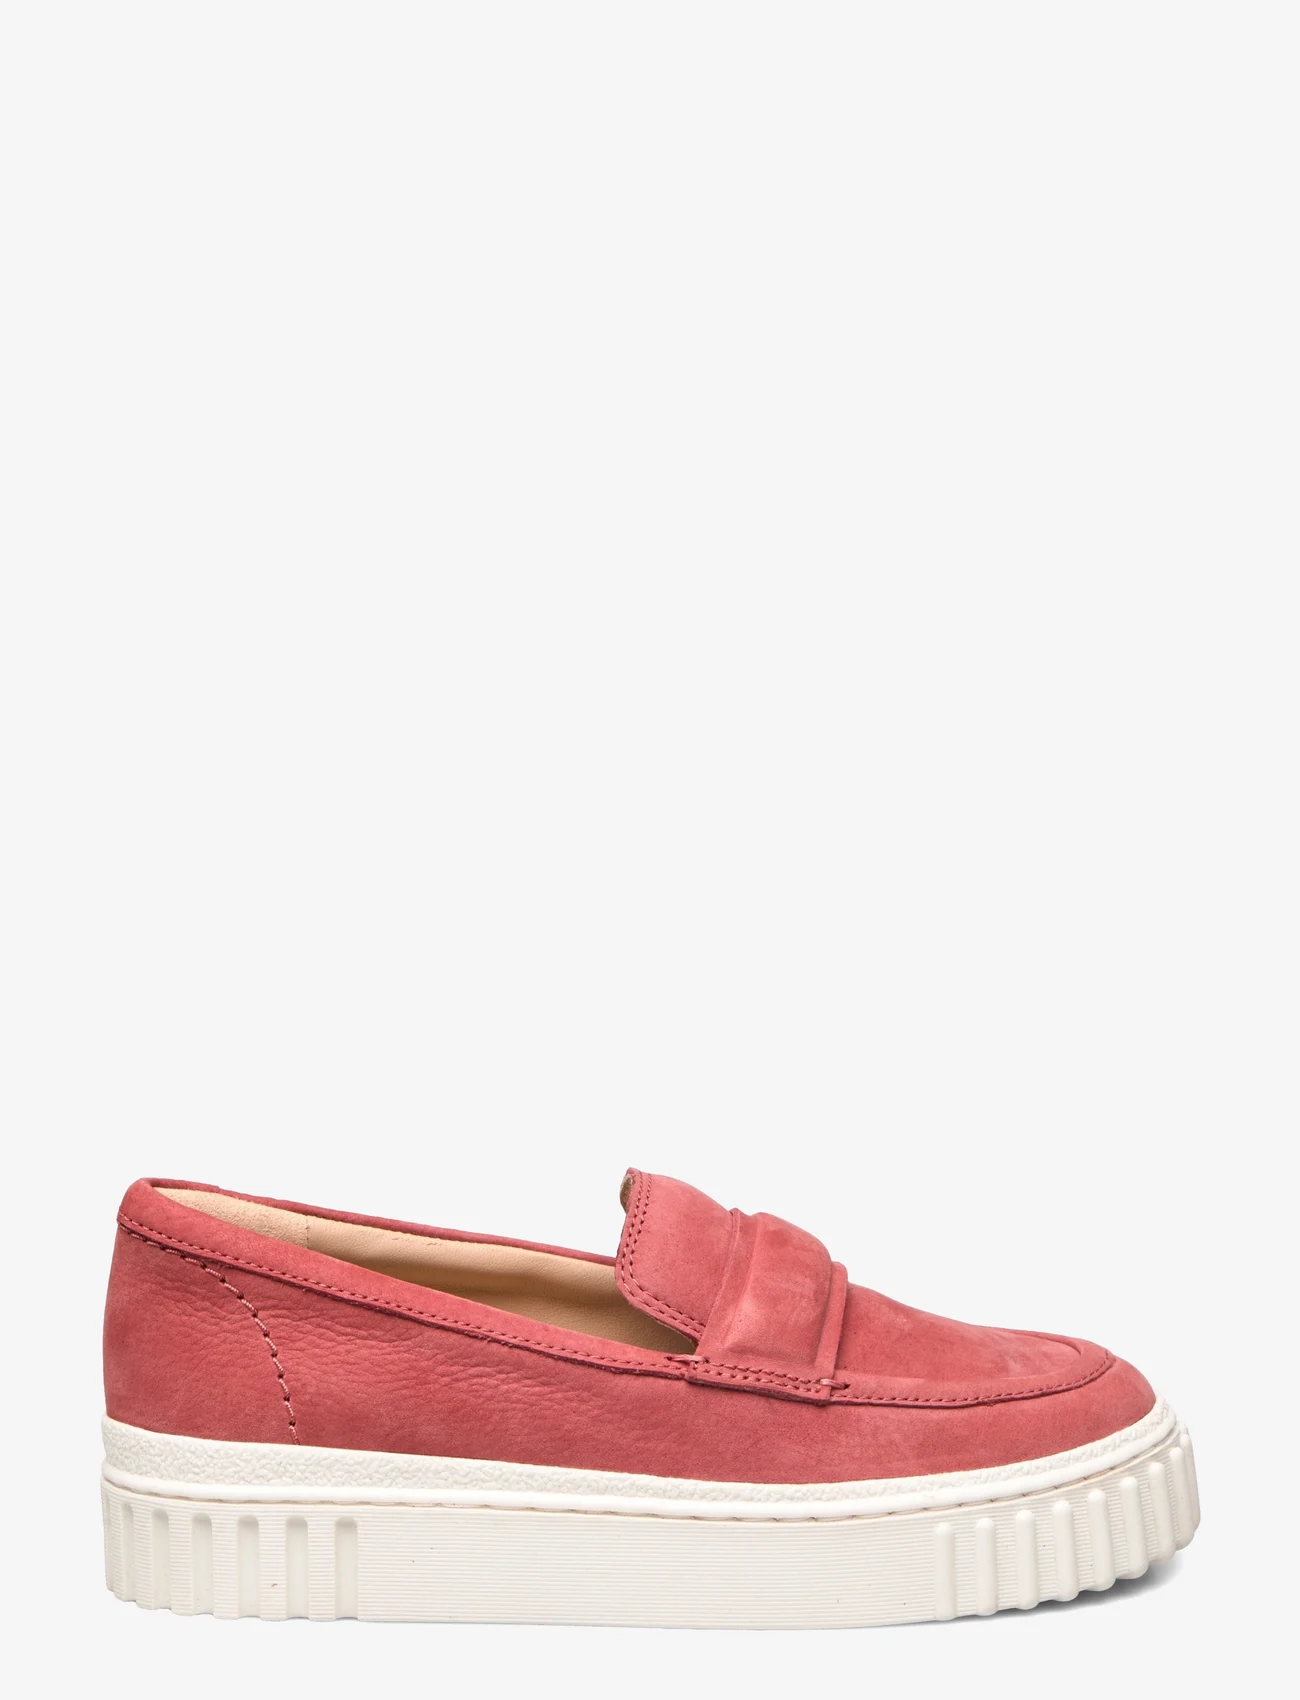 Clarks - Mayhill Cove D - birthday gifts - 4335 dusty rose nbk - 1